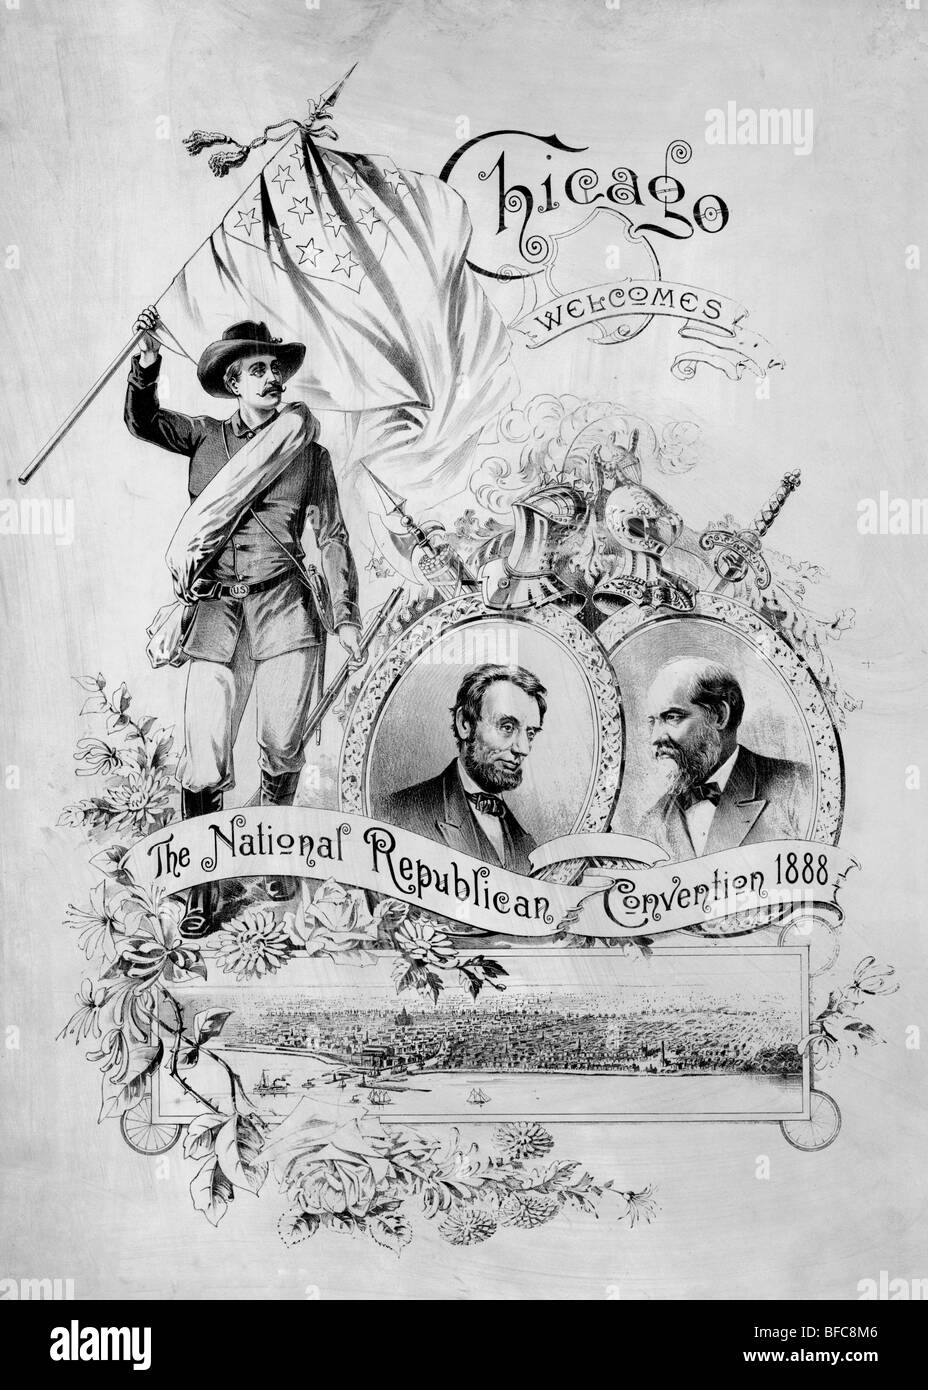 Chicago welcomes the National Republican Convention 1888 - Campaign Poster Stock Photo